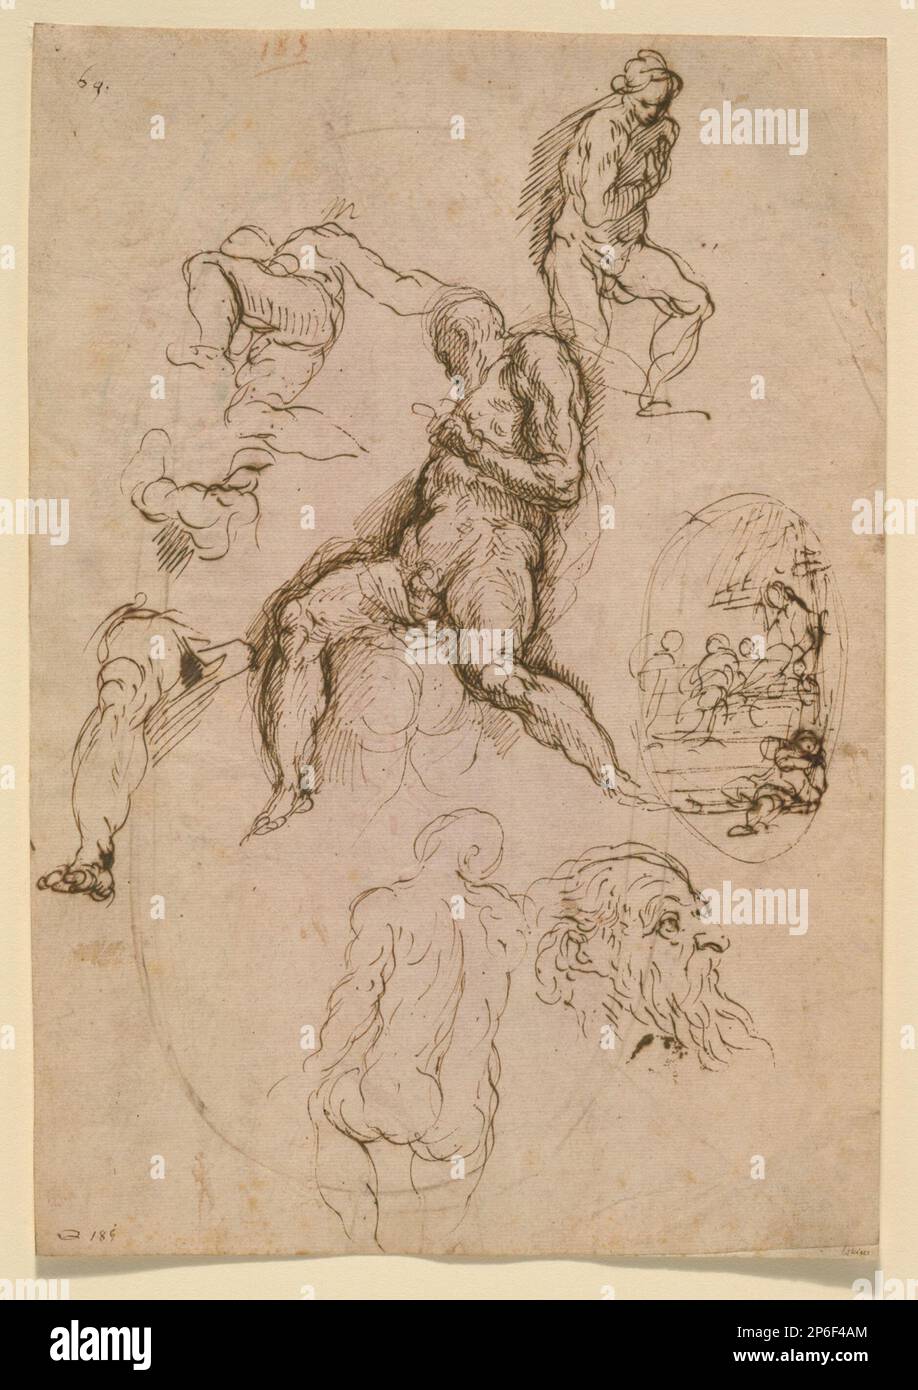 jacopo palma il giovane sheet of studies for painting in the salone del maggior consiglio ducal palace venice c 1578 pen and brown ink on laid paper 2P6F4AM